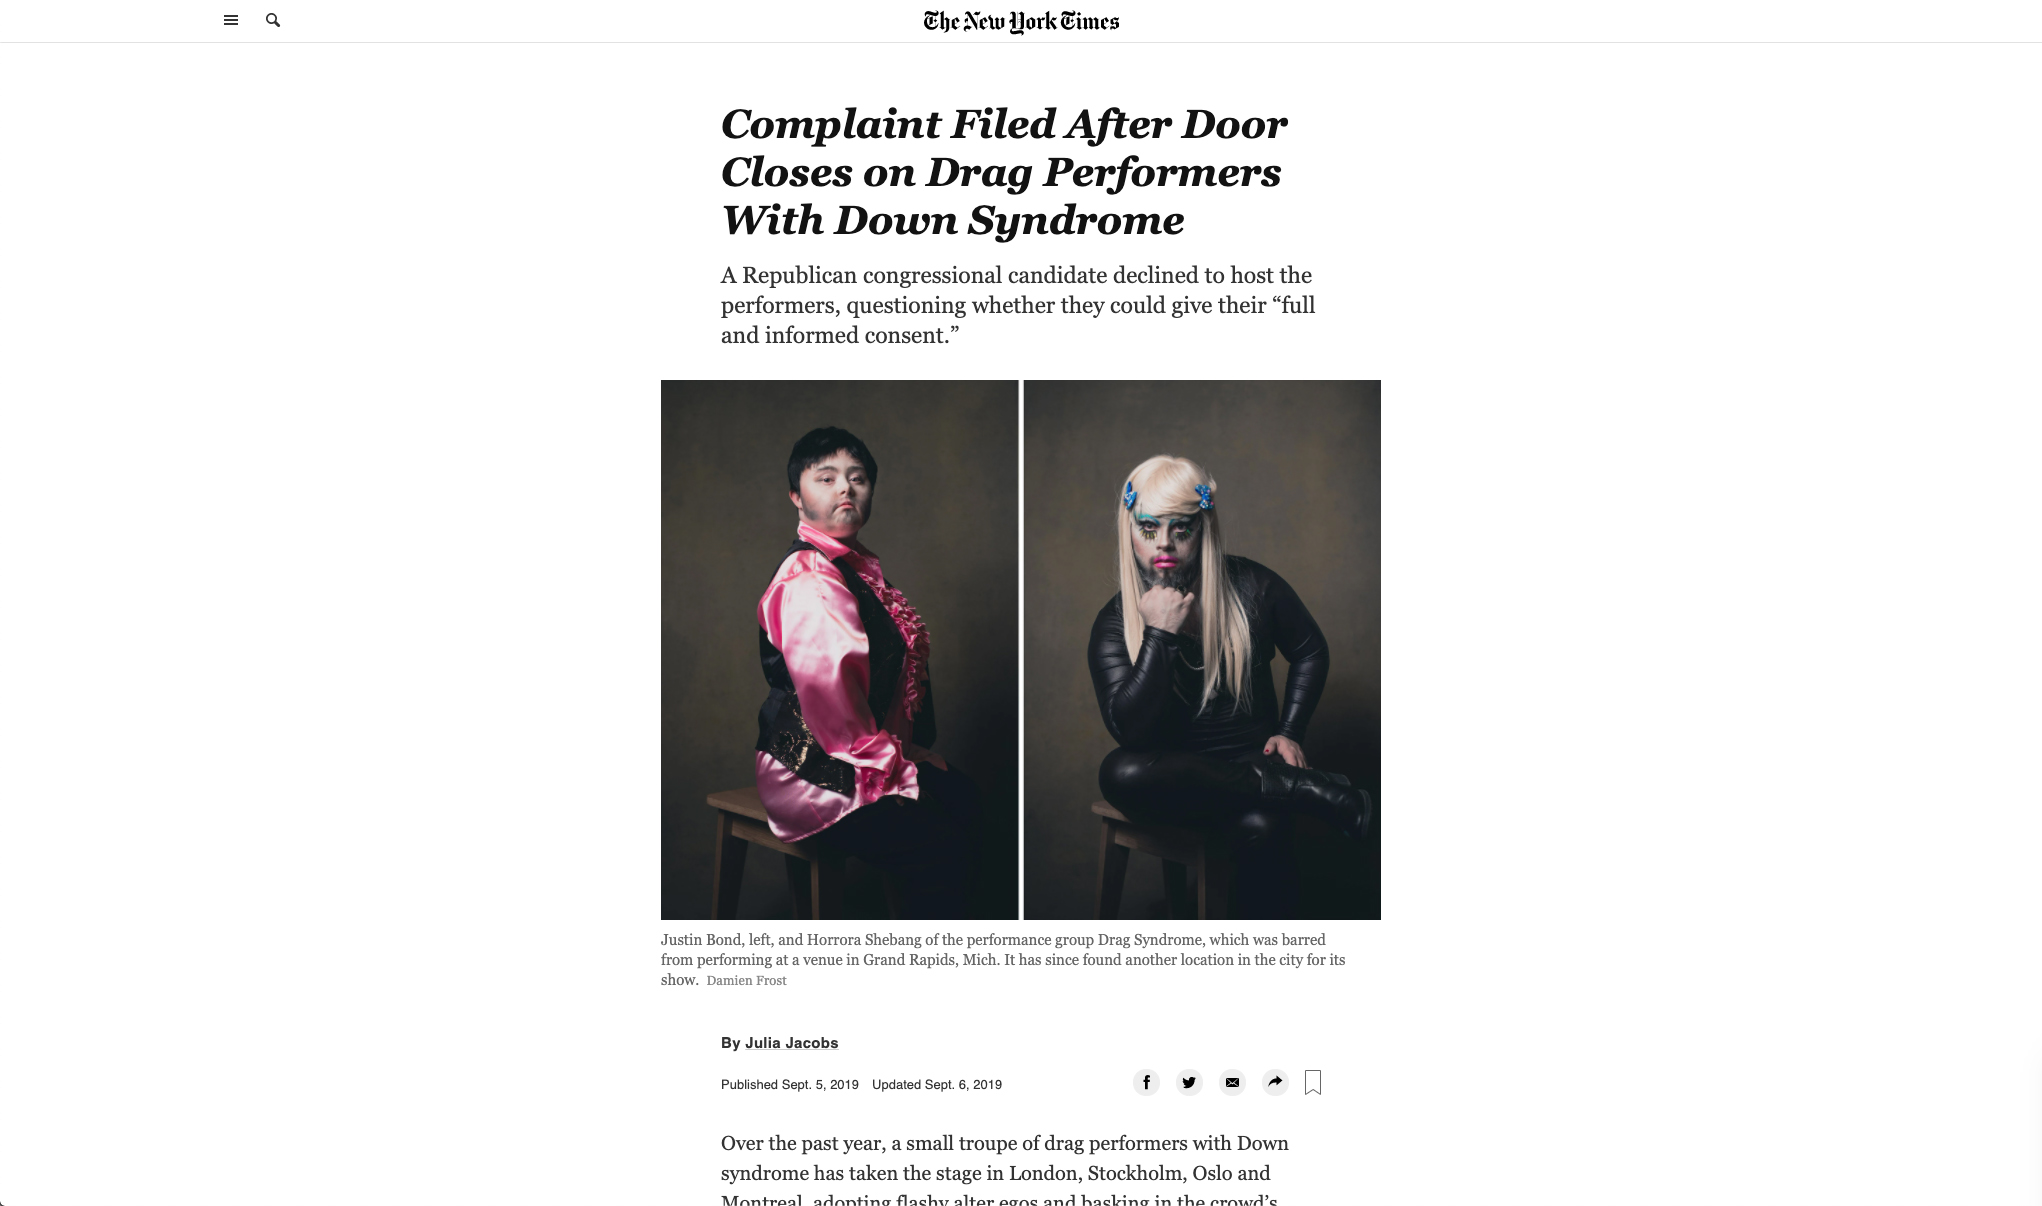 Drag Syndrome New York Times photos by Damien Frost